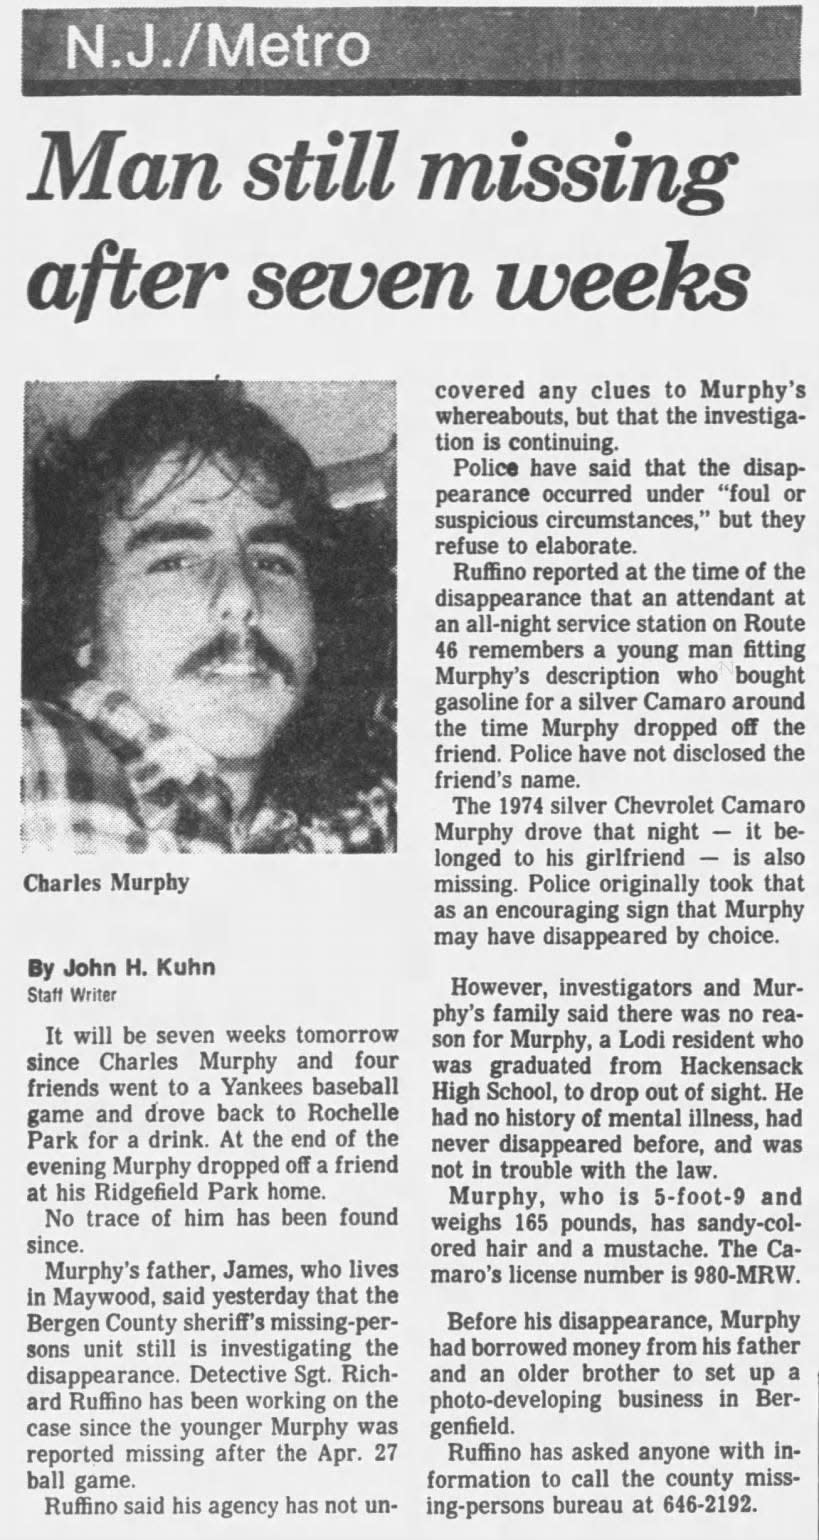 A clip from The Record from June 14, 1982 about Charles Murphy being missing.